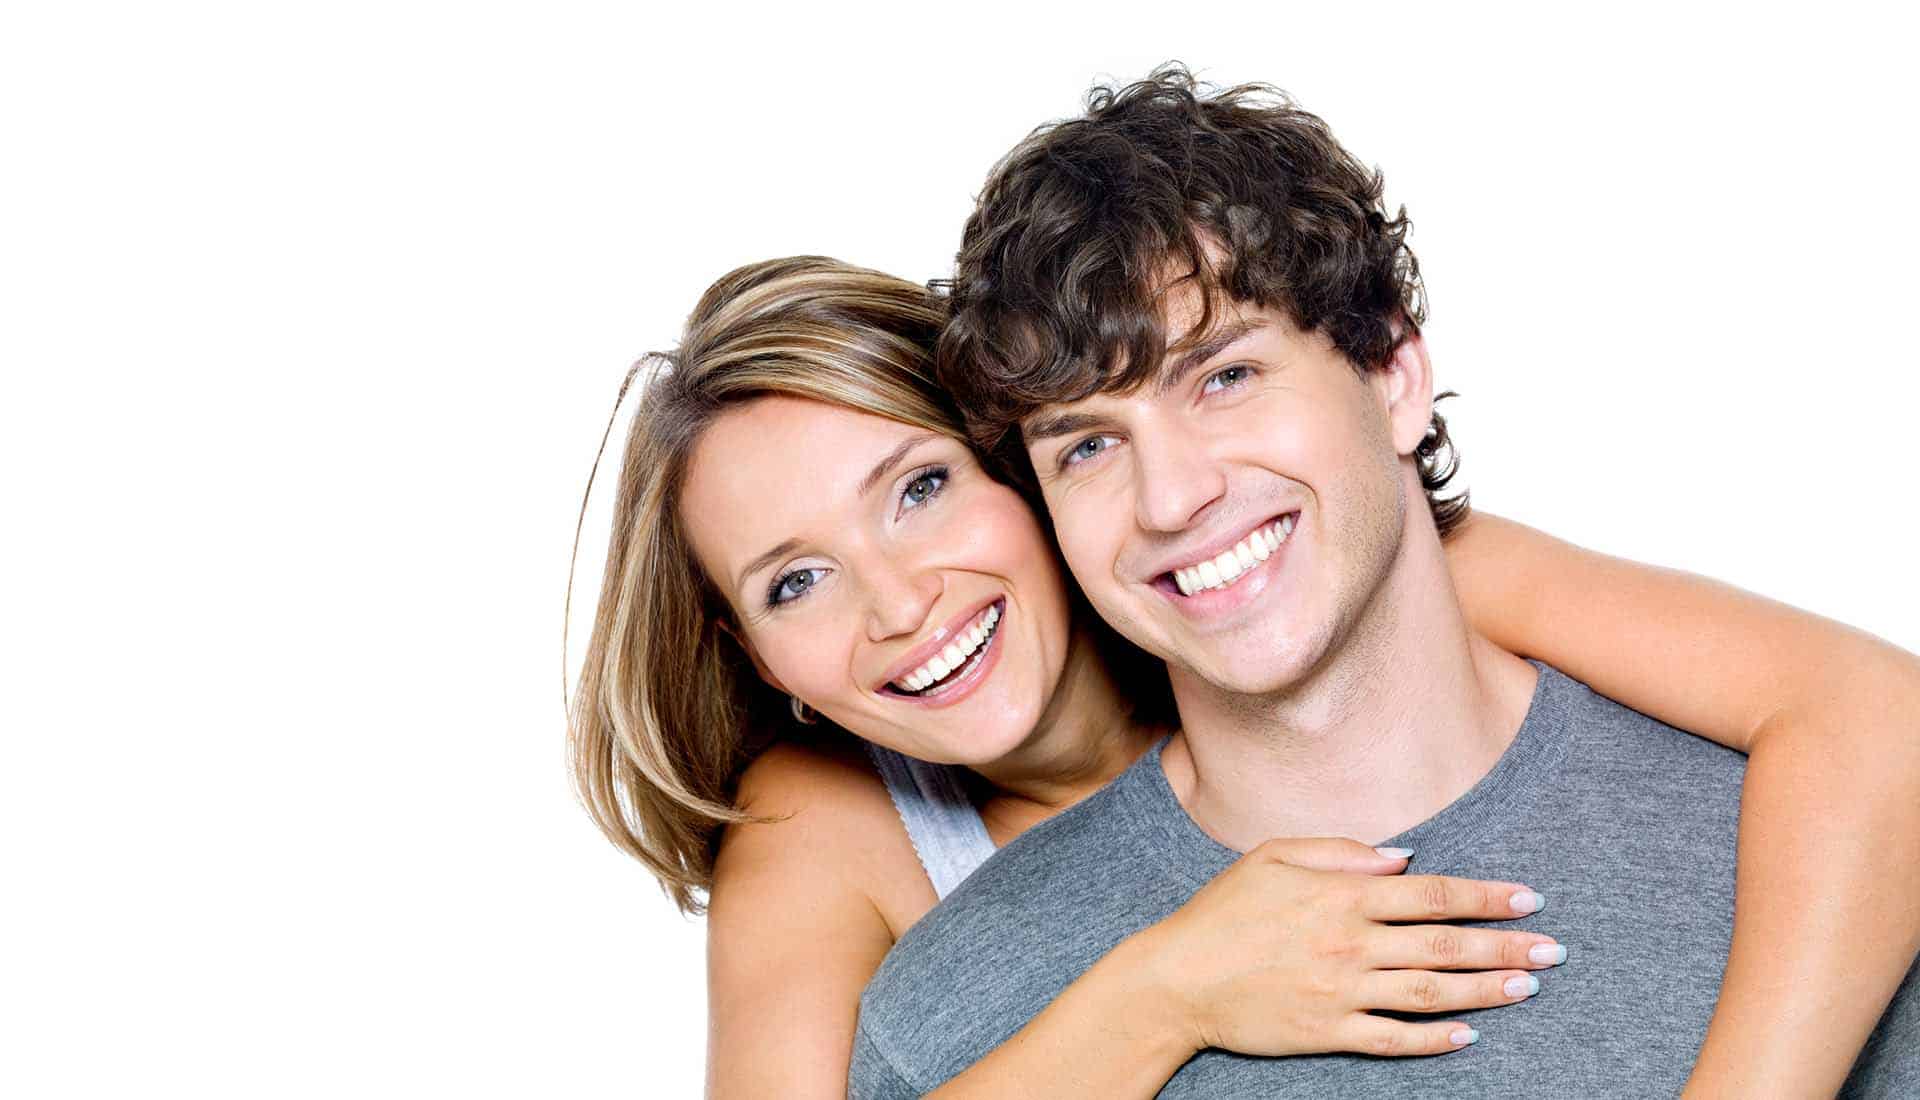 Portrait of a beautiful young happy smiling couple on a white background.